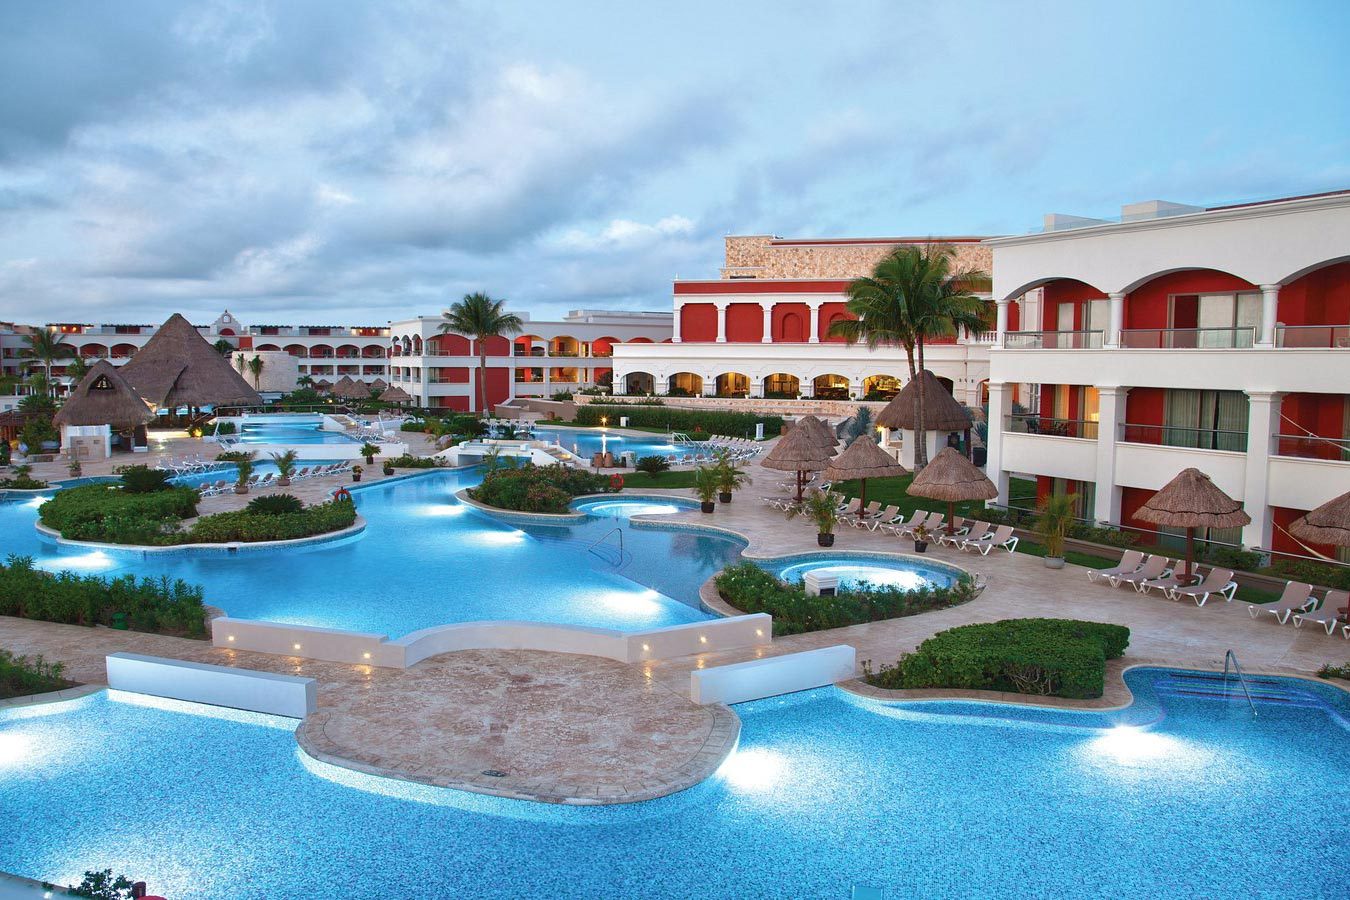 <h3>Hard Rock Hotel Riviera Maya, Mexico</h3> <p>It can be hard to get a <a href="https://www.rd.com/list/family-vacations-with-teens/">teen to buy into a family vacation</a>—but not when you promise it'll rock hard. That's practically a guarantee at this <a href="https://www.tripadvisor.com/Hotel_Review-g153510-d1383489-Reviews-Hard_Rock_Hotel_Riviera_Maya-Puerto_Aventuras_Yucatan_Peninsula.html" rel="noopener noreferrer">large all-inclusive property</a> in Mexico's Riviera Maya. Rooms are spacious and decorated in warm, rich tones, but that's not what makes it hot. Teens have access to some super-sweet amenities that will have them rethinking how cool a vacay with the 'rents can be.</p> <p>Dance contests, music quizzes, water balloon fights and paddle board lessons are all on their list of activities, and teens can play in the HyperX Gaming Lounge—which is fully equipped with Xboxes, Nintendo Switches, gaming PCs and a VR station—until midnight. Then there's the Music Lab for serious bragging rights. This program lets kids and teens take part in a jam band, record a music session with a producer, star in a music video, borrow a real Fender guitar and more. But everyone's a kid at the on-site Rockaway Bay Water Park.</p> <p><strong>Pros:</strong></p> <ul> <li>Teen-friendly features, including a gaming lounge, music lab and water park</li> <li>Mature and tween-geared amenities and programs</li> <li>Diverse range of dining options for picky eaters</li> </ul> <p><strong>Con:</strong></p> <ul> <li>Can be at the top range of the budget</li> </ul> <p class="listicle-page__cta-button-shop"><a class="shop-btn" href="https://www.tripadvisor.com/Hotel_Review-g153510-d1383489-Reviews-Hard_Rock_Hotel_Riviera_Maya-Puerto_Aventuras_Yucatan_Peninsula.html">Book Now</a></p>